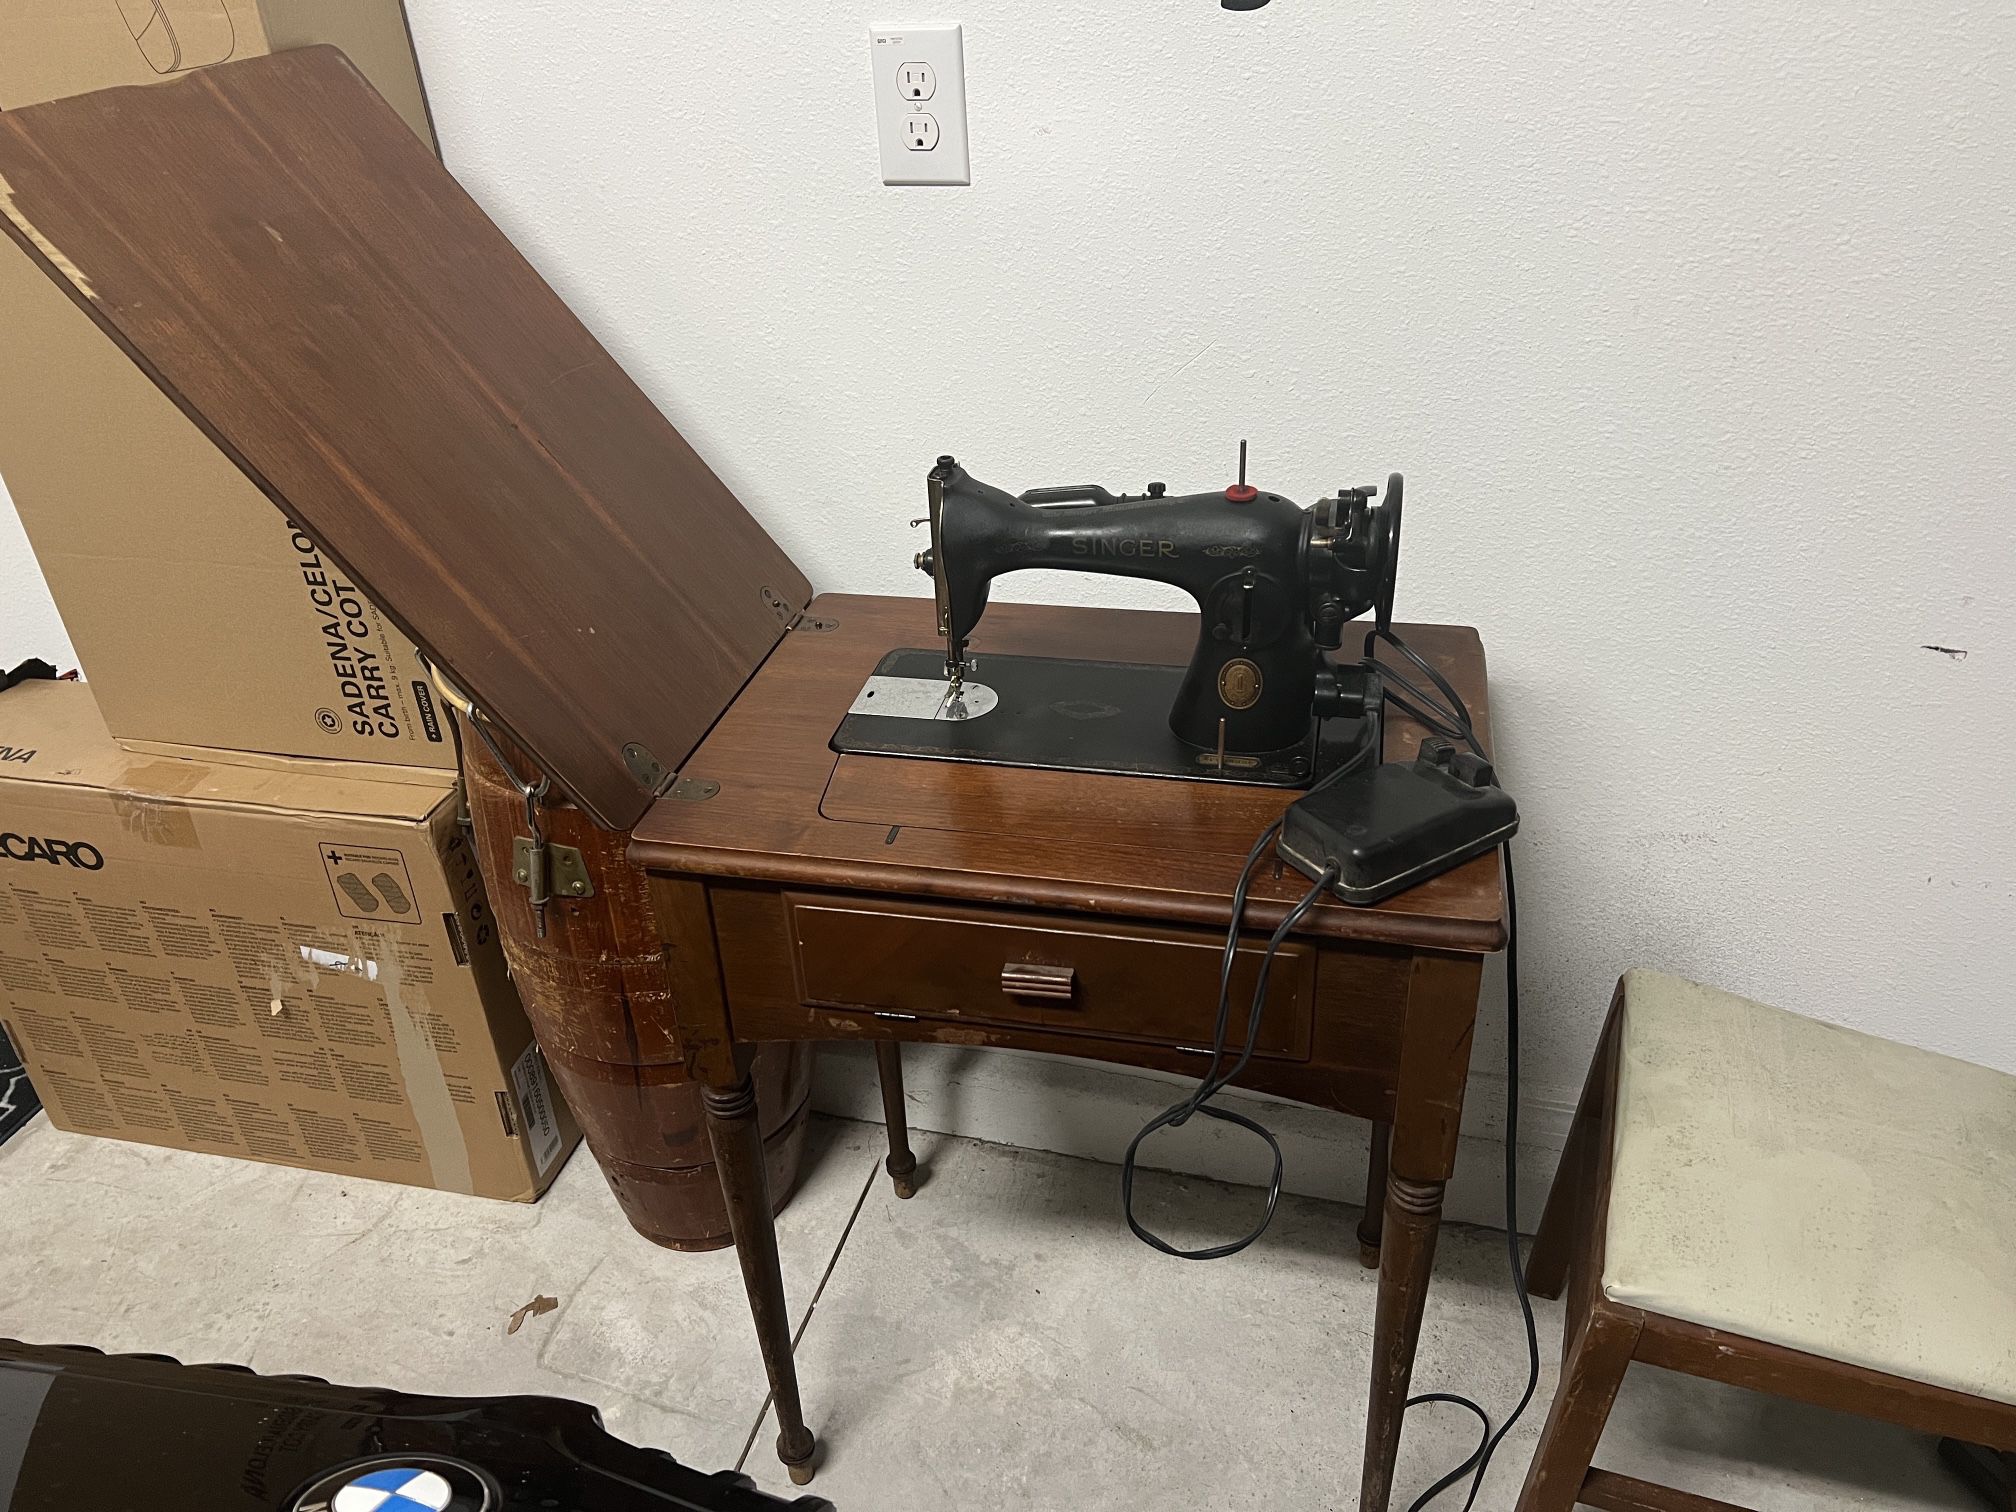 1950s Singer elecric sewing machine W/table&chair